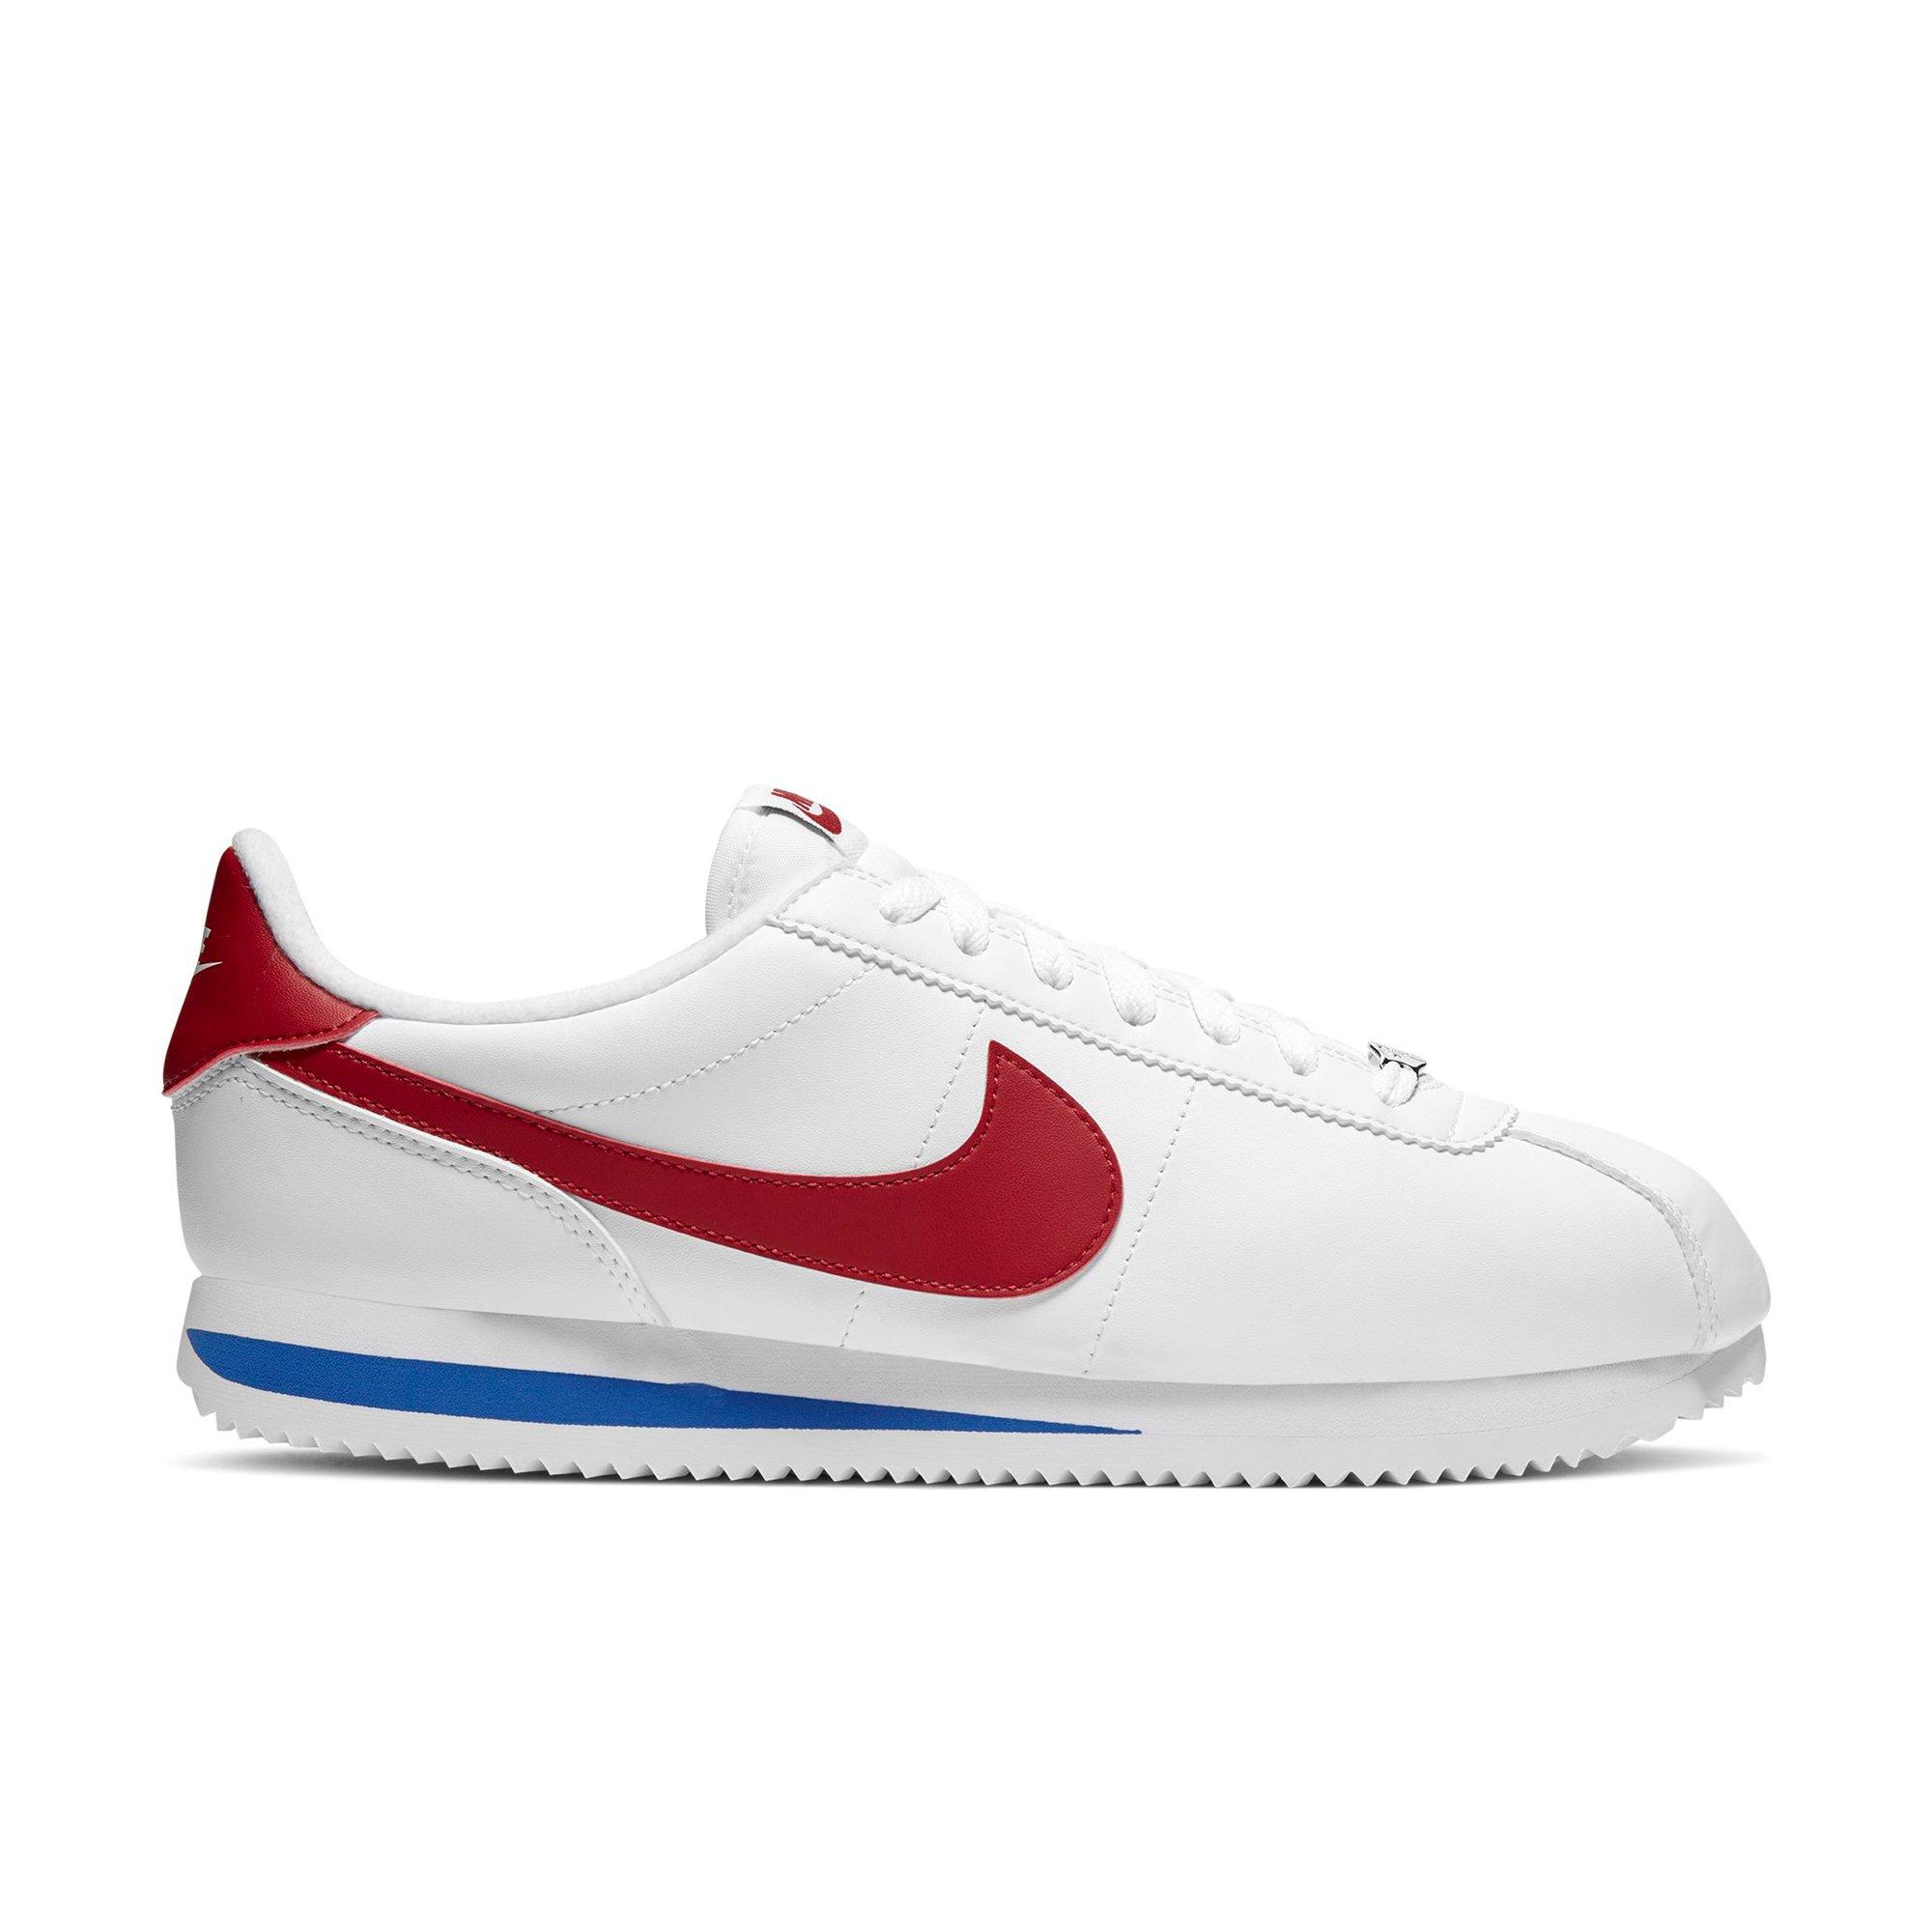 red blue and white nikes